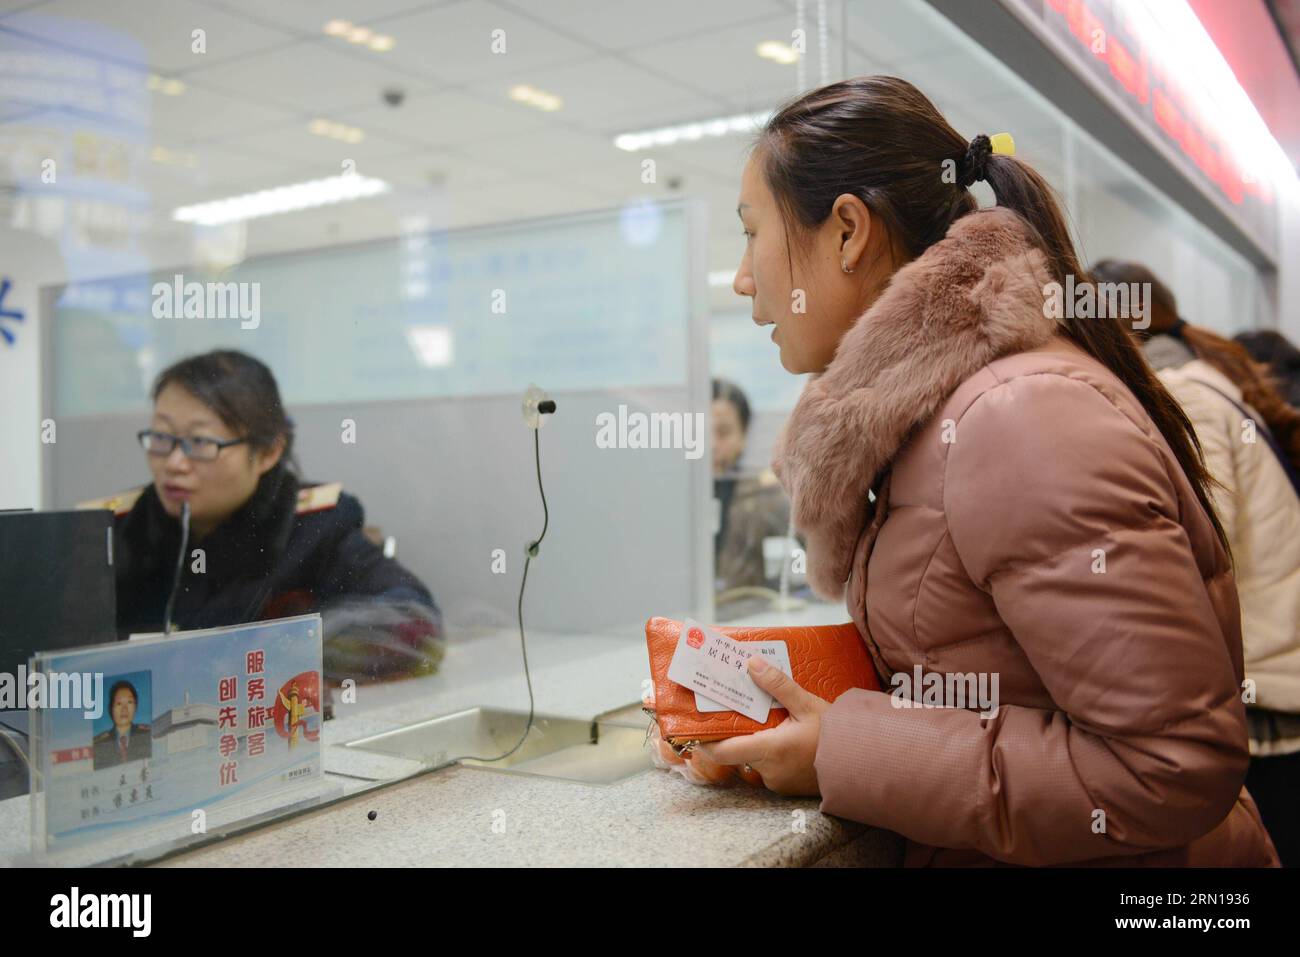 A passenger inquires about tickets at the ticket office of Hohhot Railway Station in Hohhot, north China s Inner Mongolia Autonomous Region, Dec. 7, 2014. China Railway Corporation (CRC), operator of China s rail network, started to sell train tickets for the 40-day travel period known as chunyun on Sunday . Chunyun , sometimes called the world s largest human migration, is the hectic travel period surrounding Chinese New Year. This year, chunyun will begin on Feb. 4 and last until March 16. ) (hdt) CHINA-RAILWAY-TICKET (CN) WangxJing PUBLICATIONxNOTxINxCHN   a Passenger Inquirer About Tickets Stock Photo